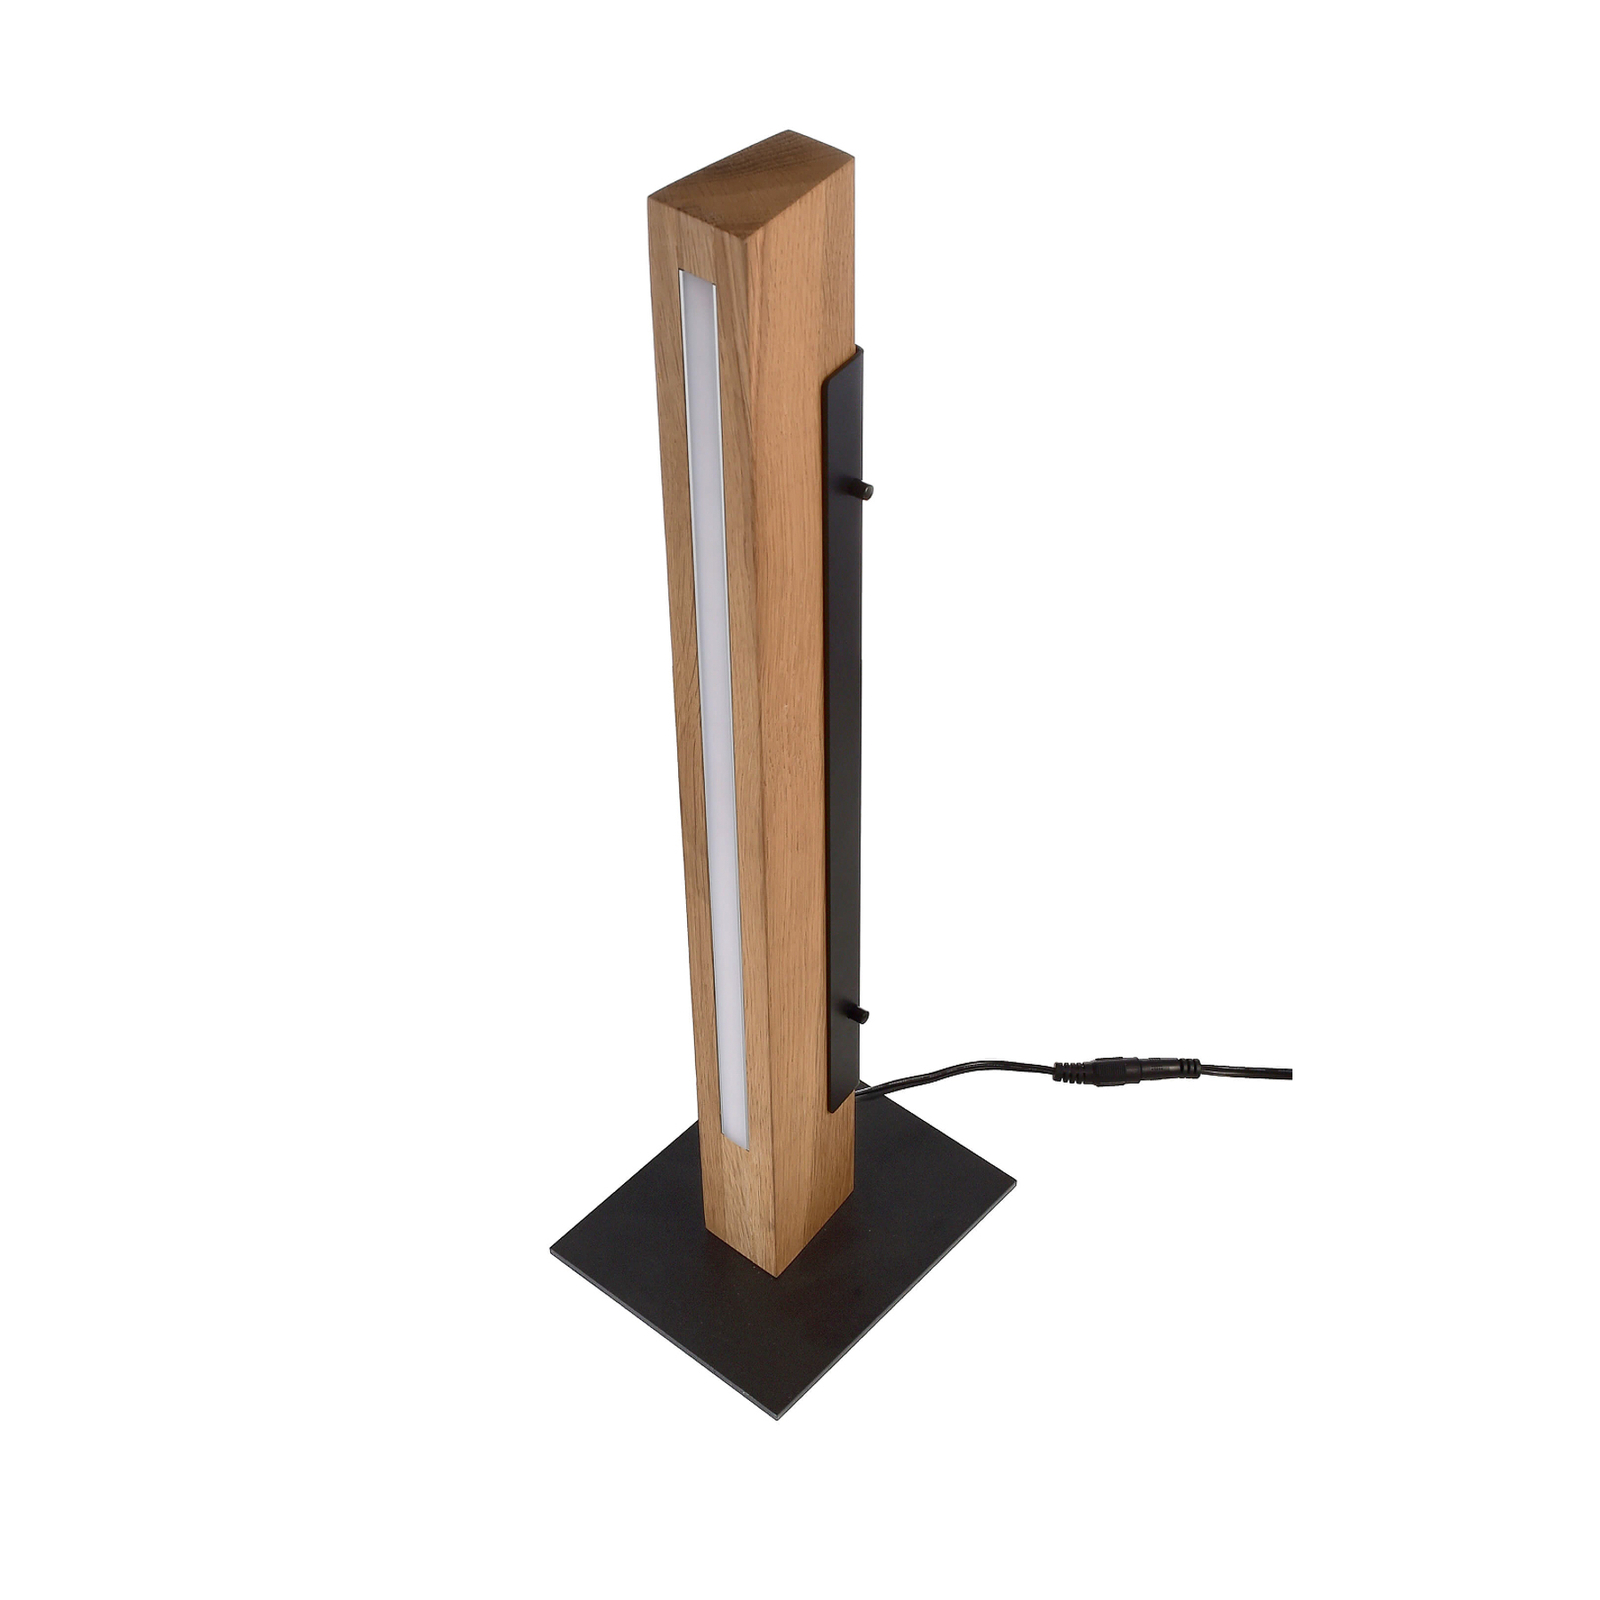 Madera LED table lamp made of oak, dimmable